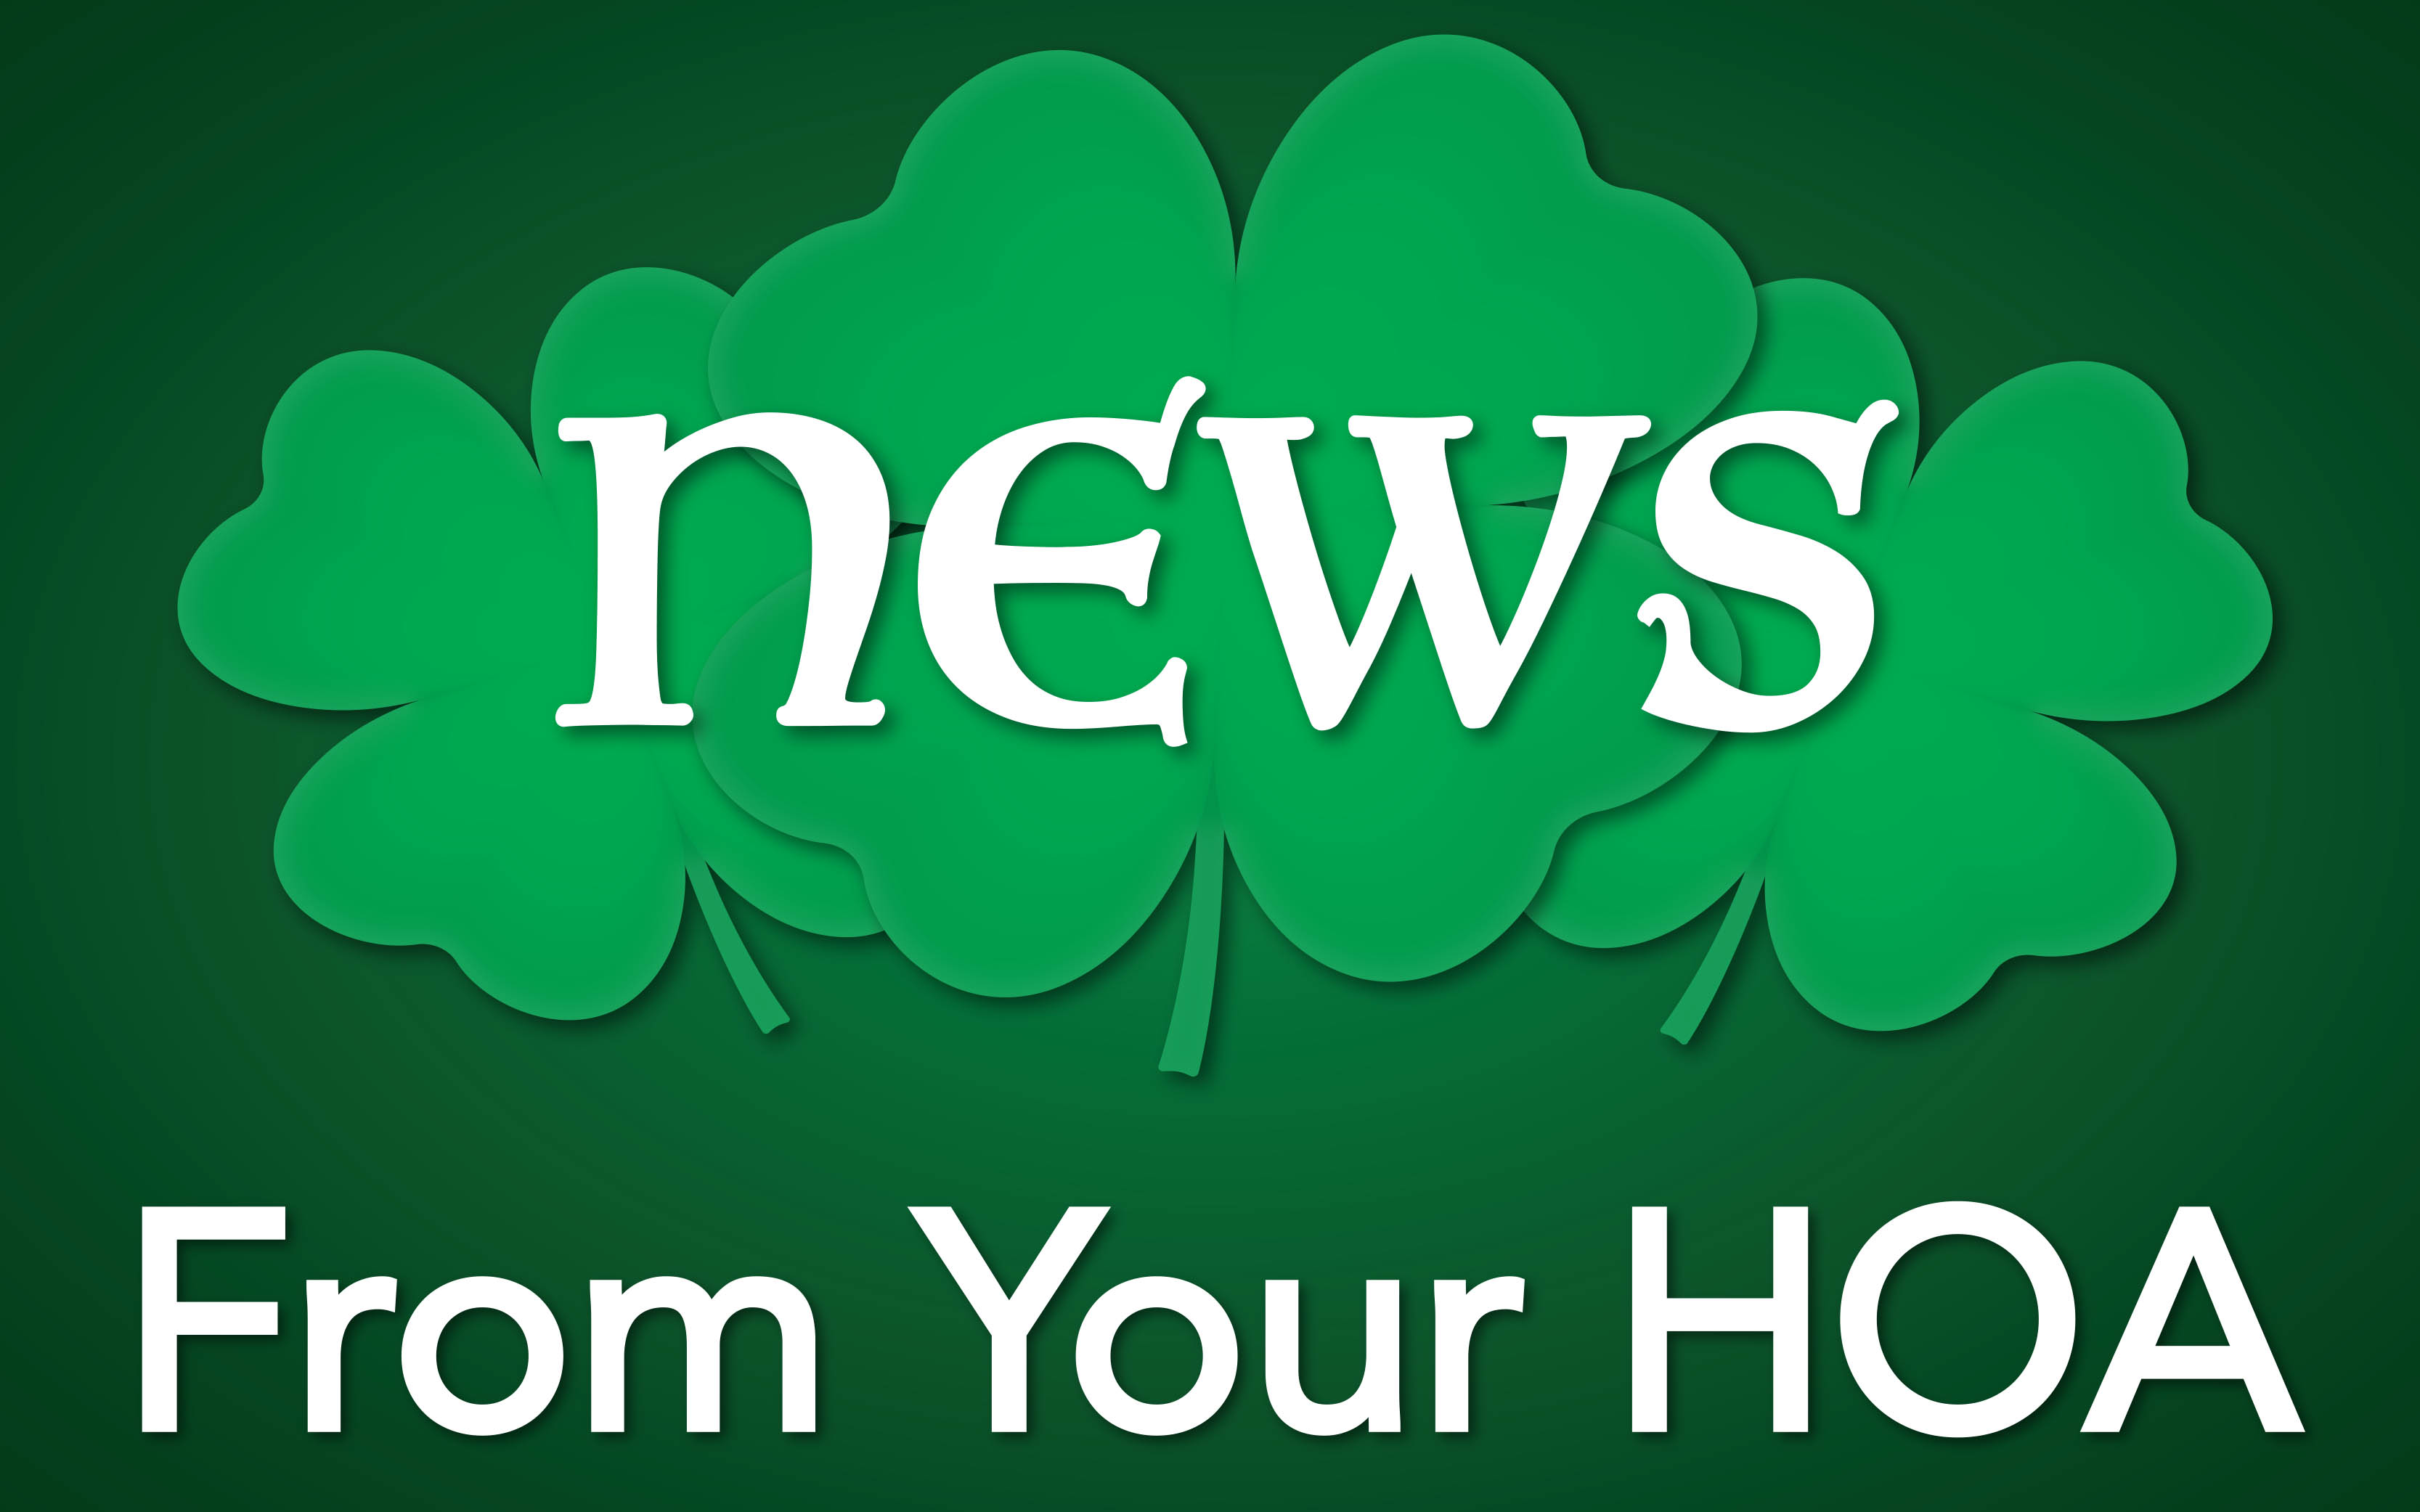 March News from Your HOA Board